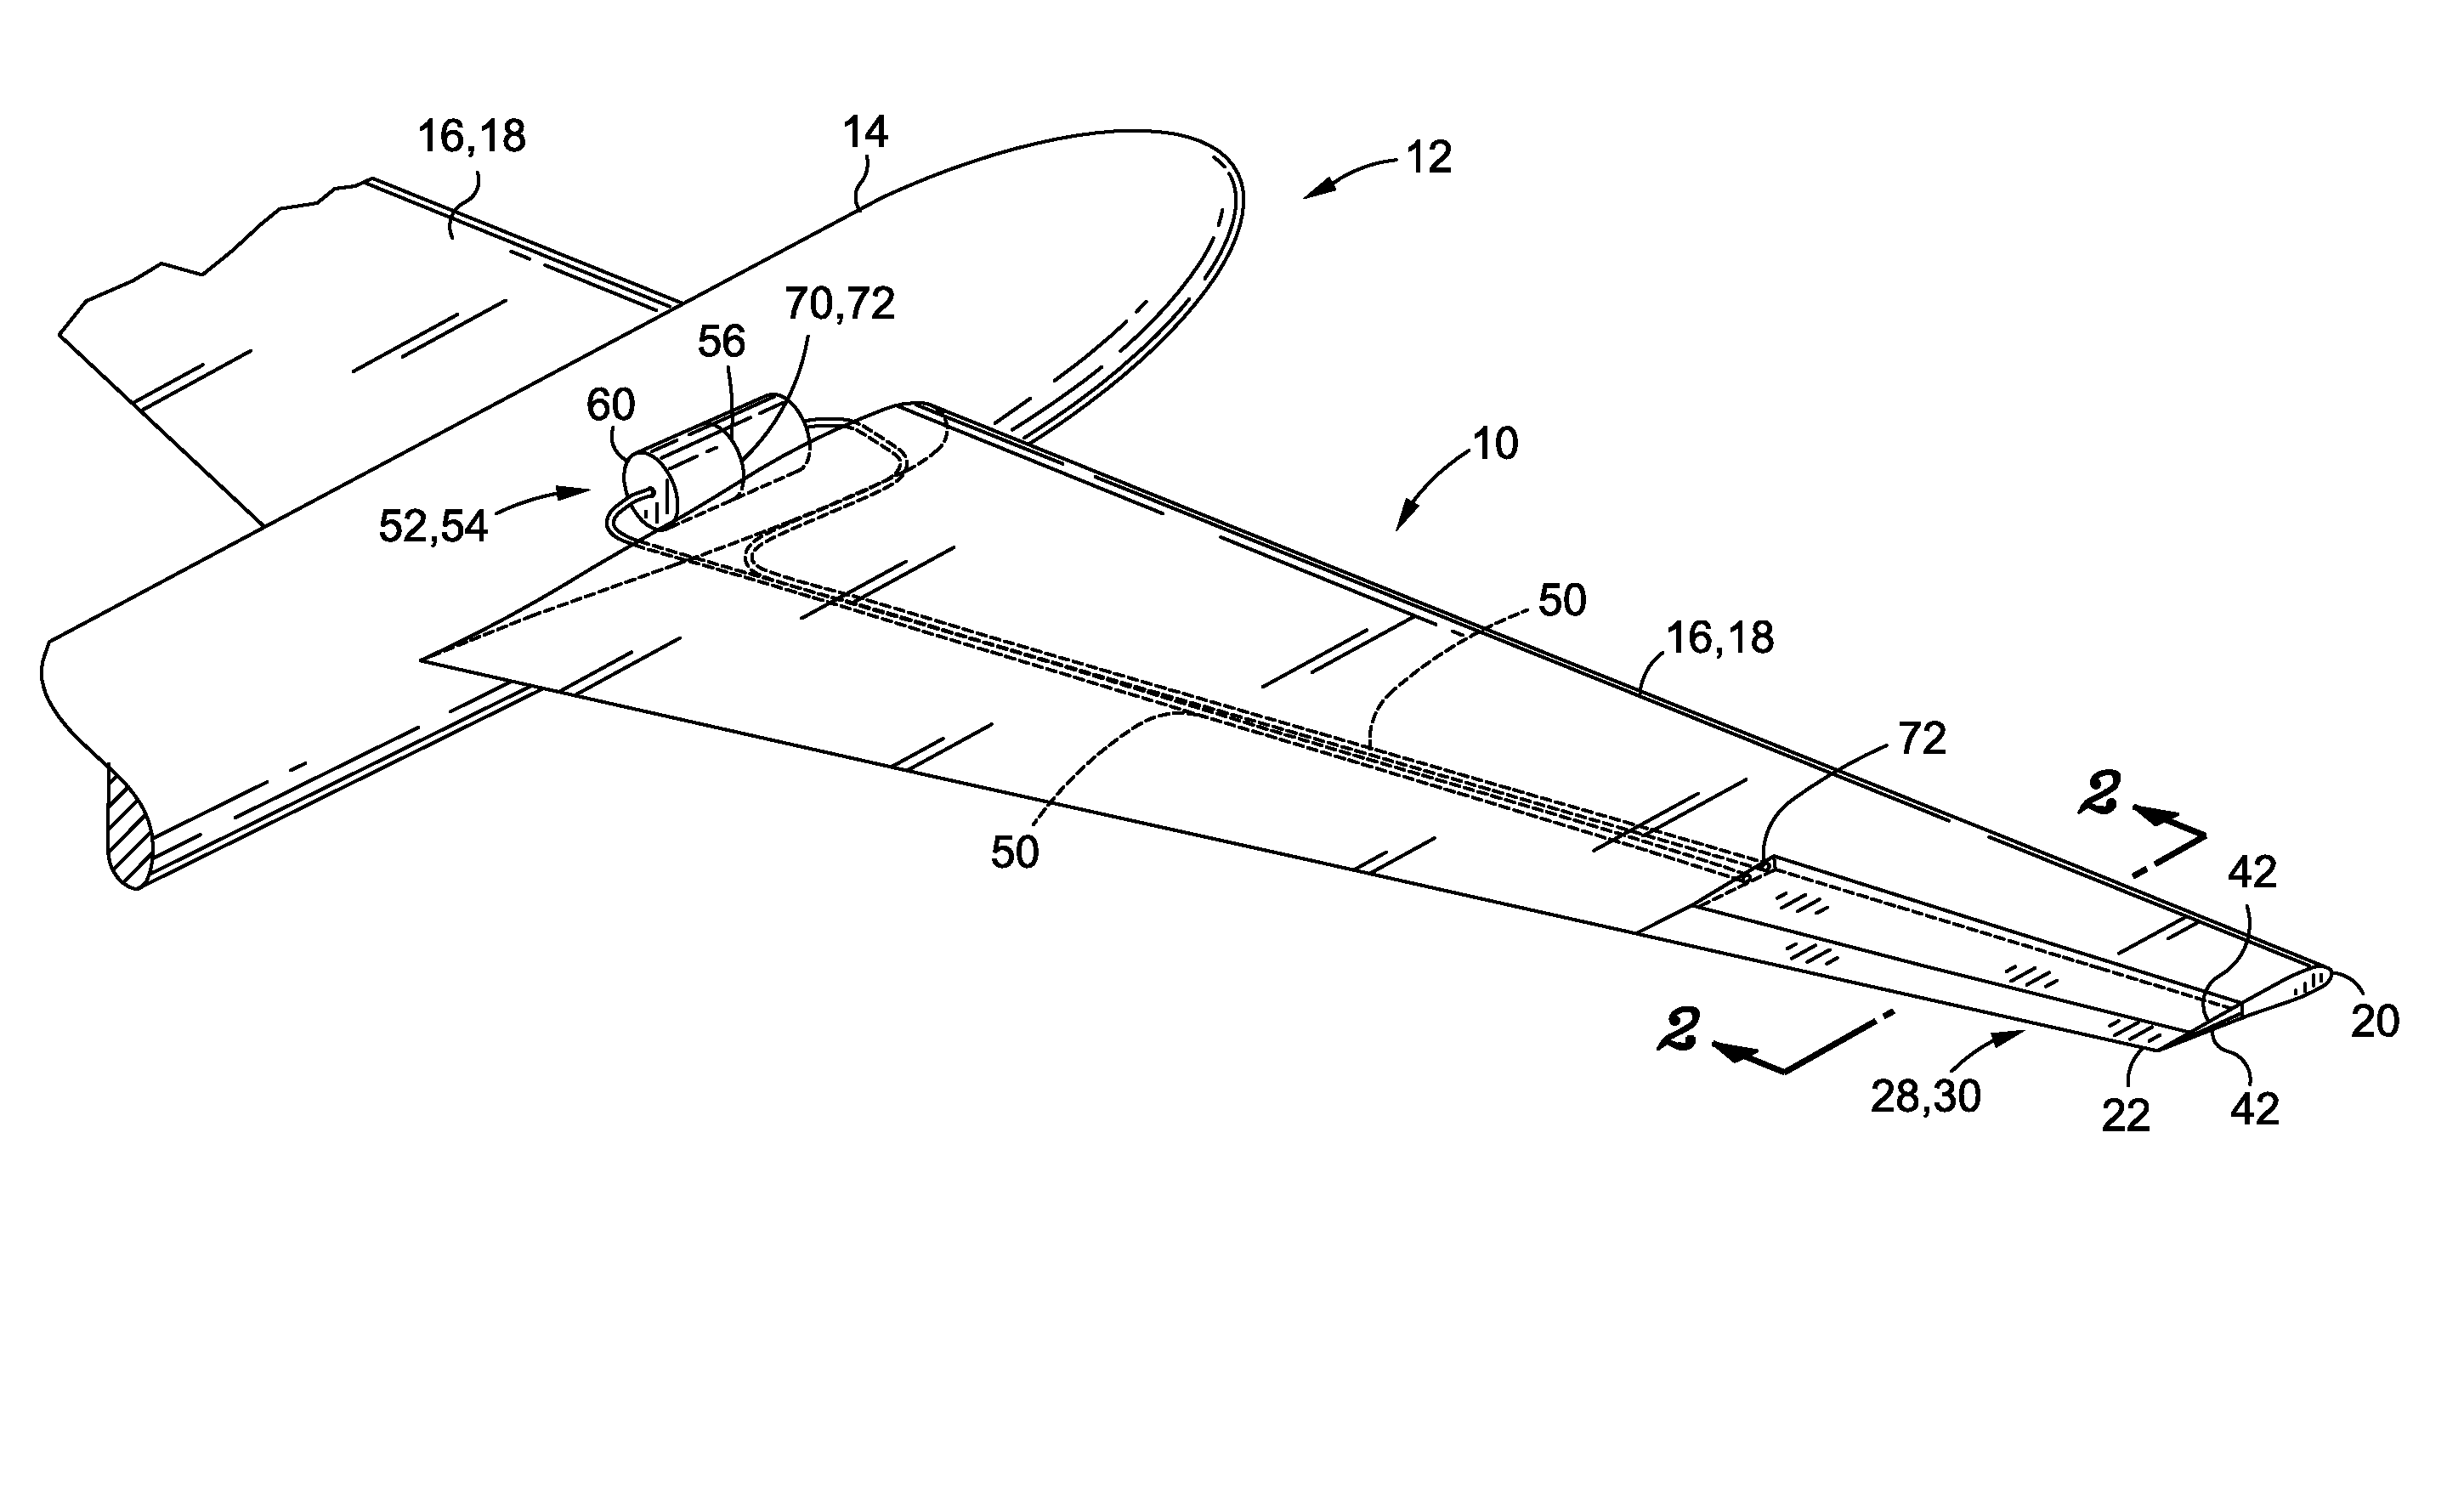 Pneumatic control system for aerodynamic surfaces